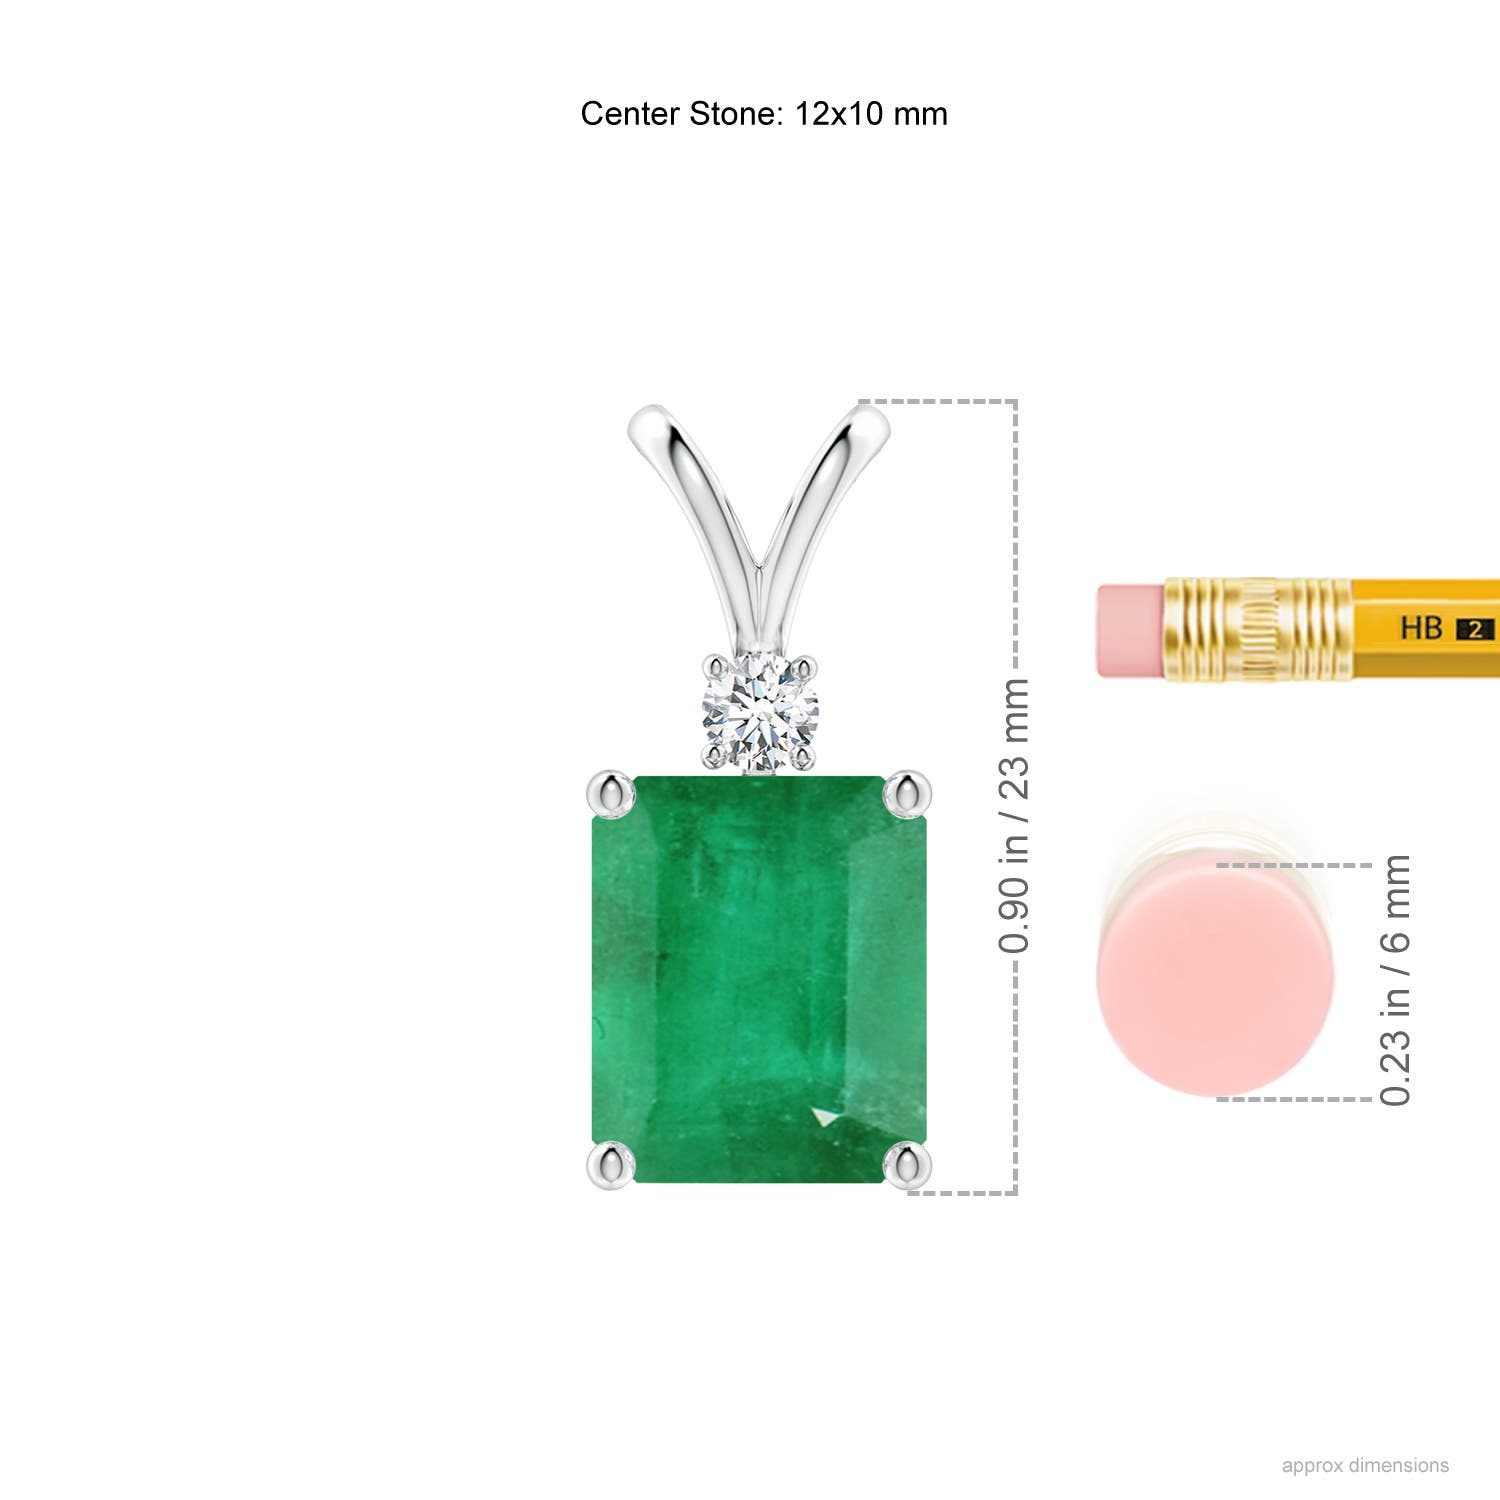 A - Emerald / 5.91 CT / 14 KT White Gold